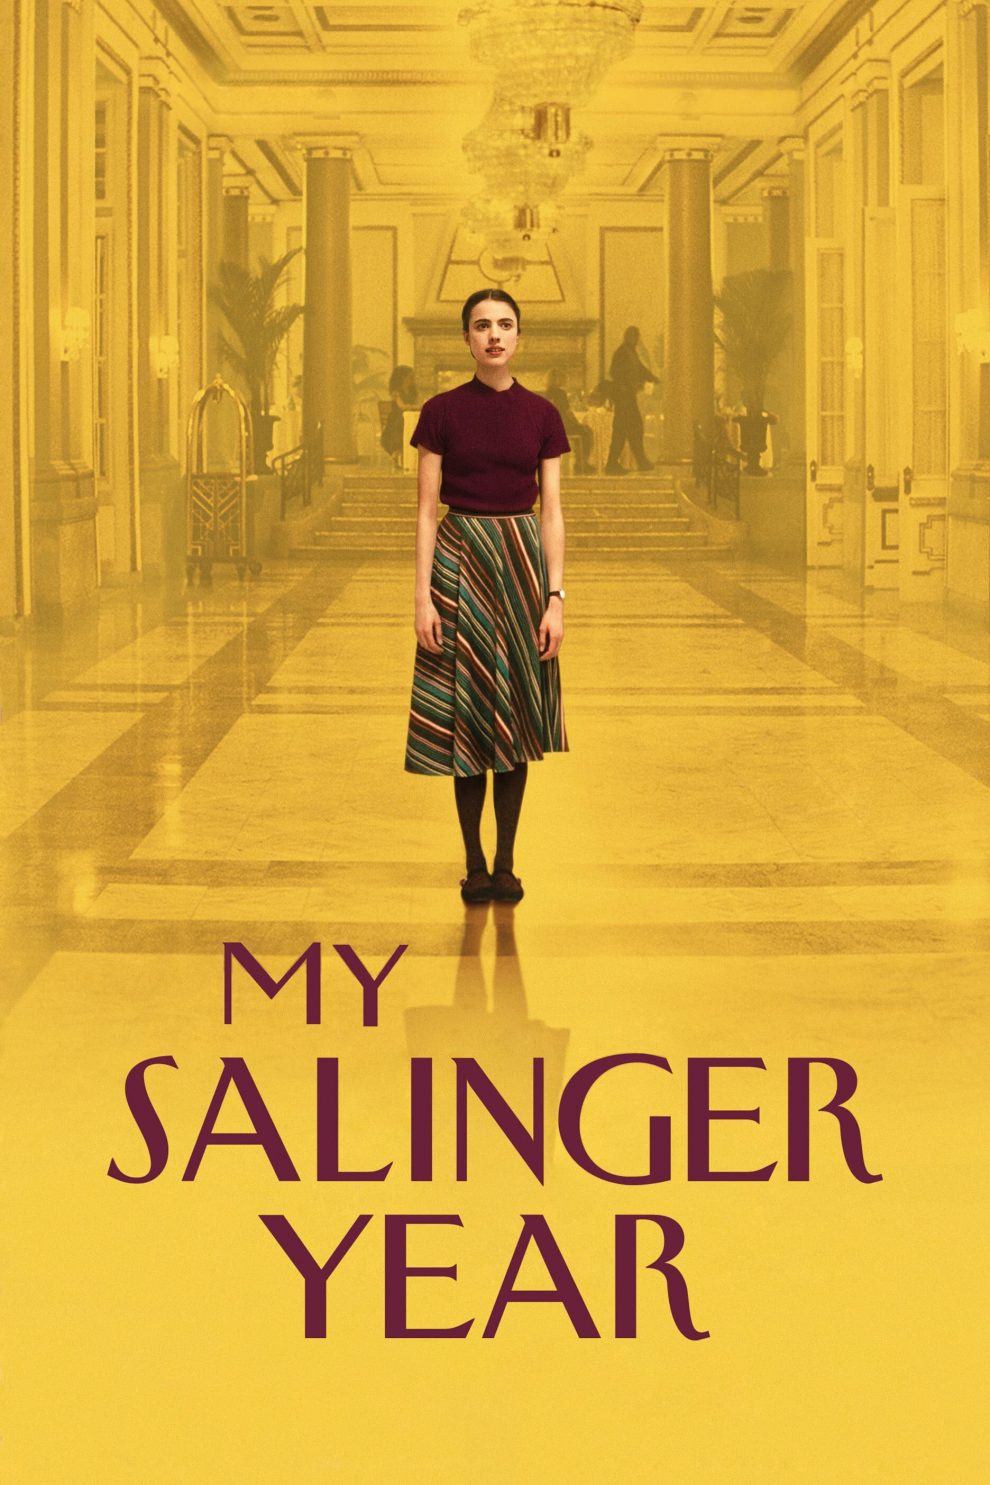 Poster for the movie "My Salinger Year"